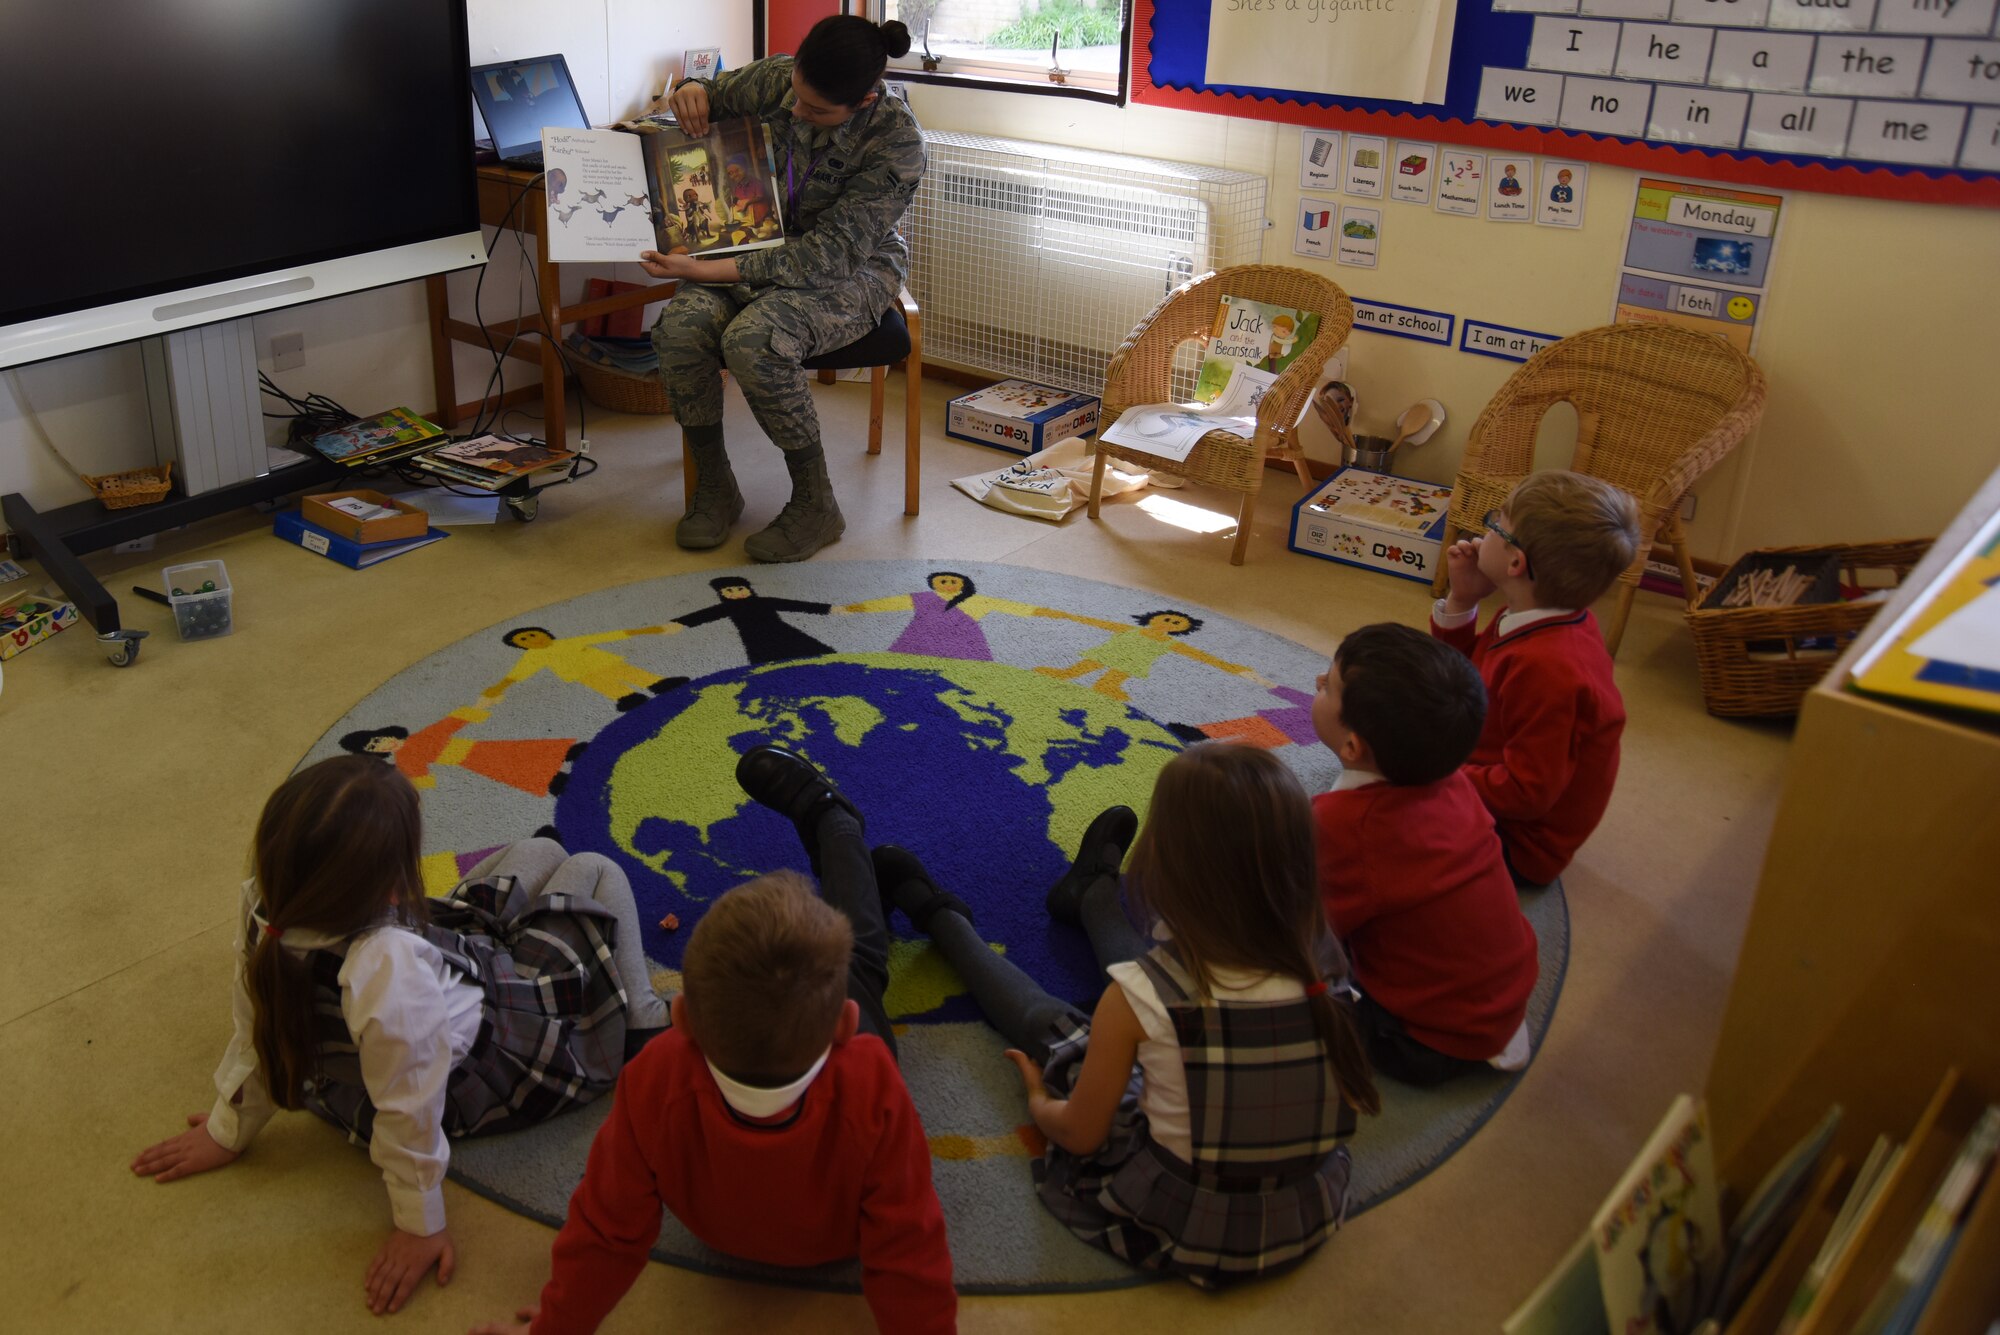 Airman 1st Class Xzandra Bradley, 48th Logistics Readiness Squadron material management journeyman, reads to a group of children at Brookes Cambridge school in Bury St. Edmunds, England, April 17, 2018. Although mostly comprised of British students, schools like Brookes Cambridge are also sometimes host to children of visiting U.S. service members. (U.S. Air Force photo/Senior Airman Abby L. Finkel)